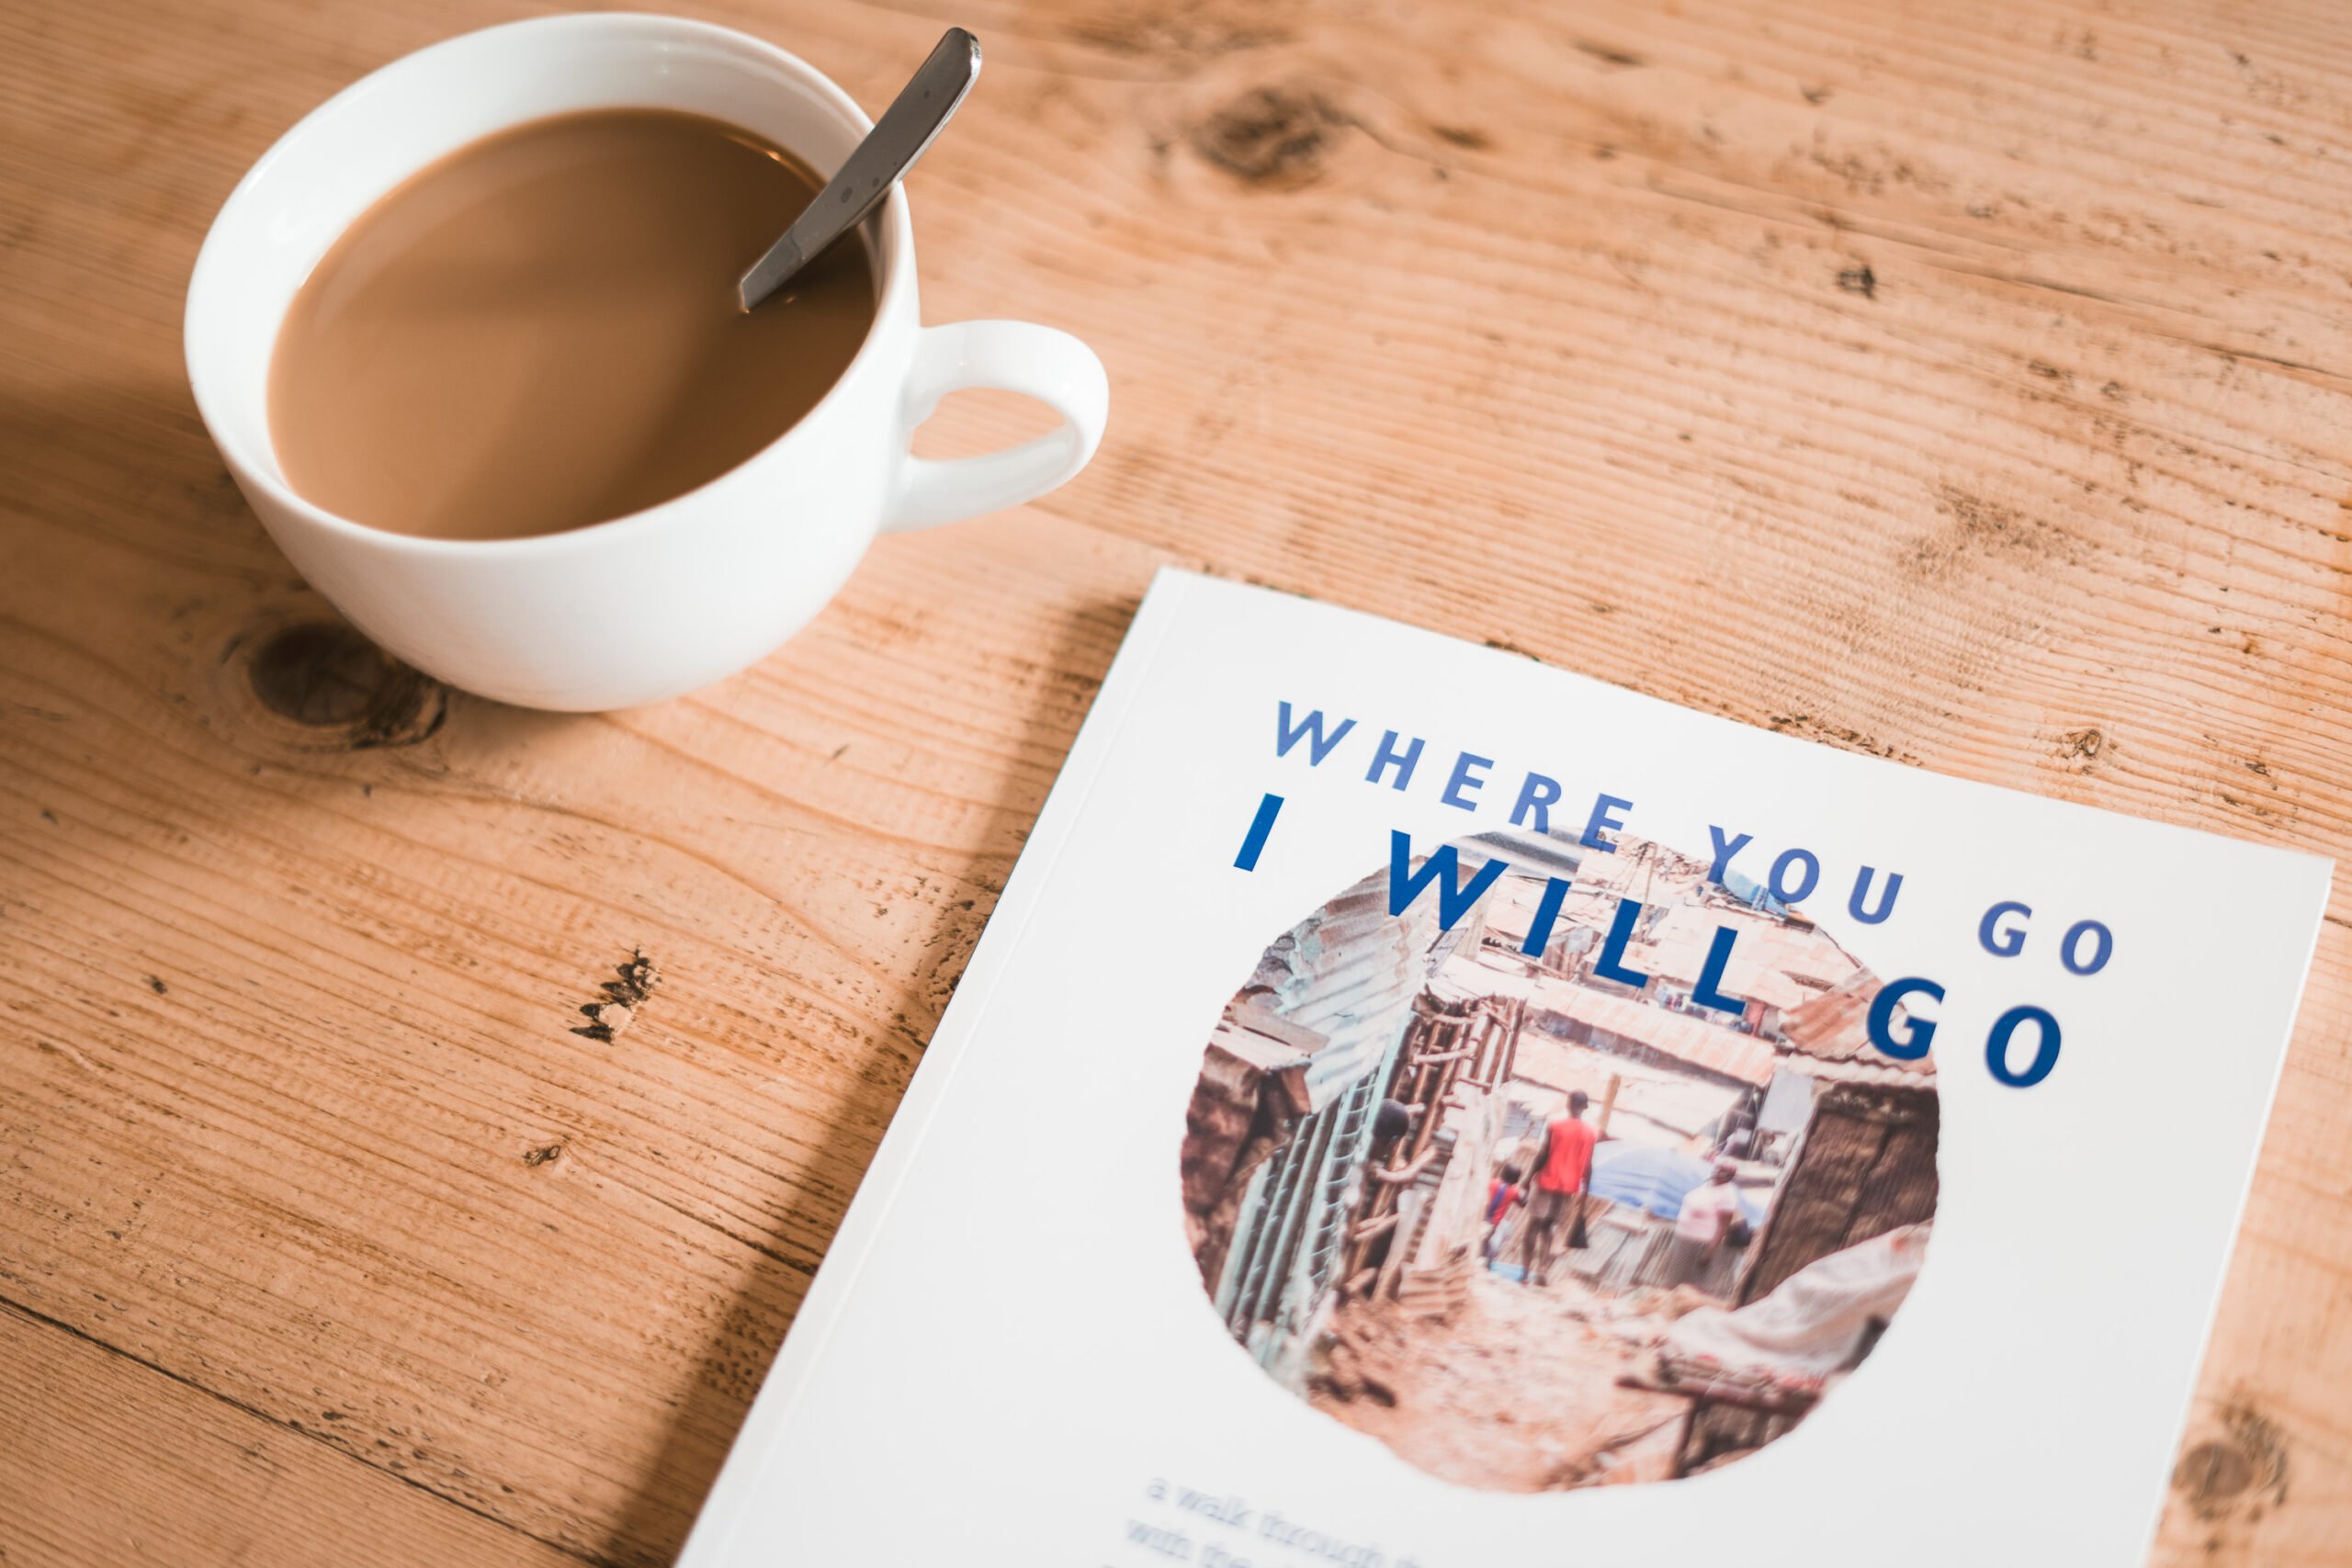 Where you go I will go book and cup of tea